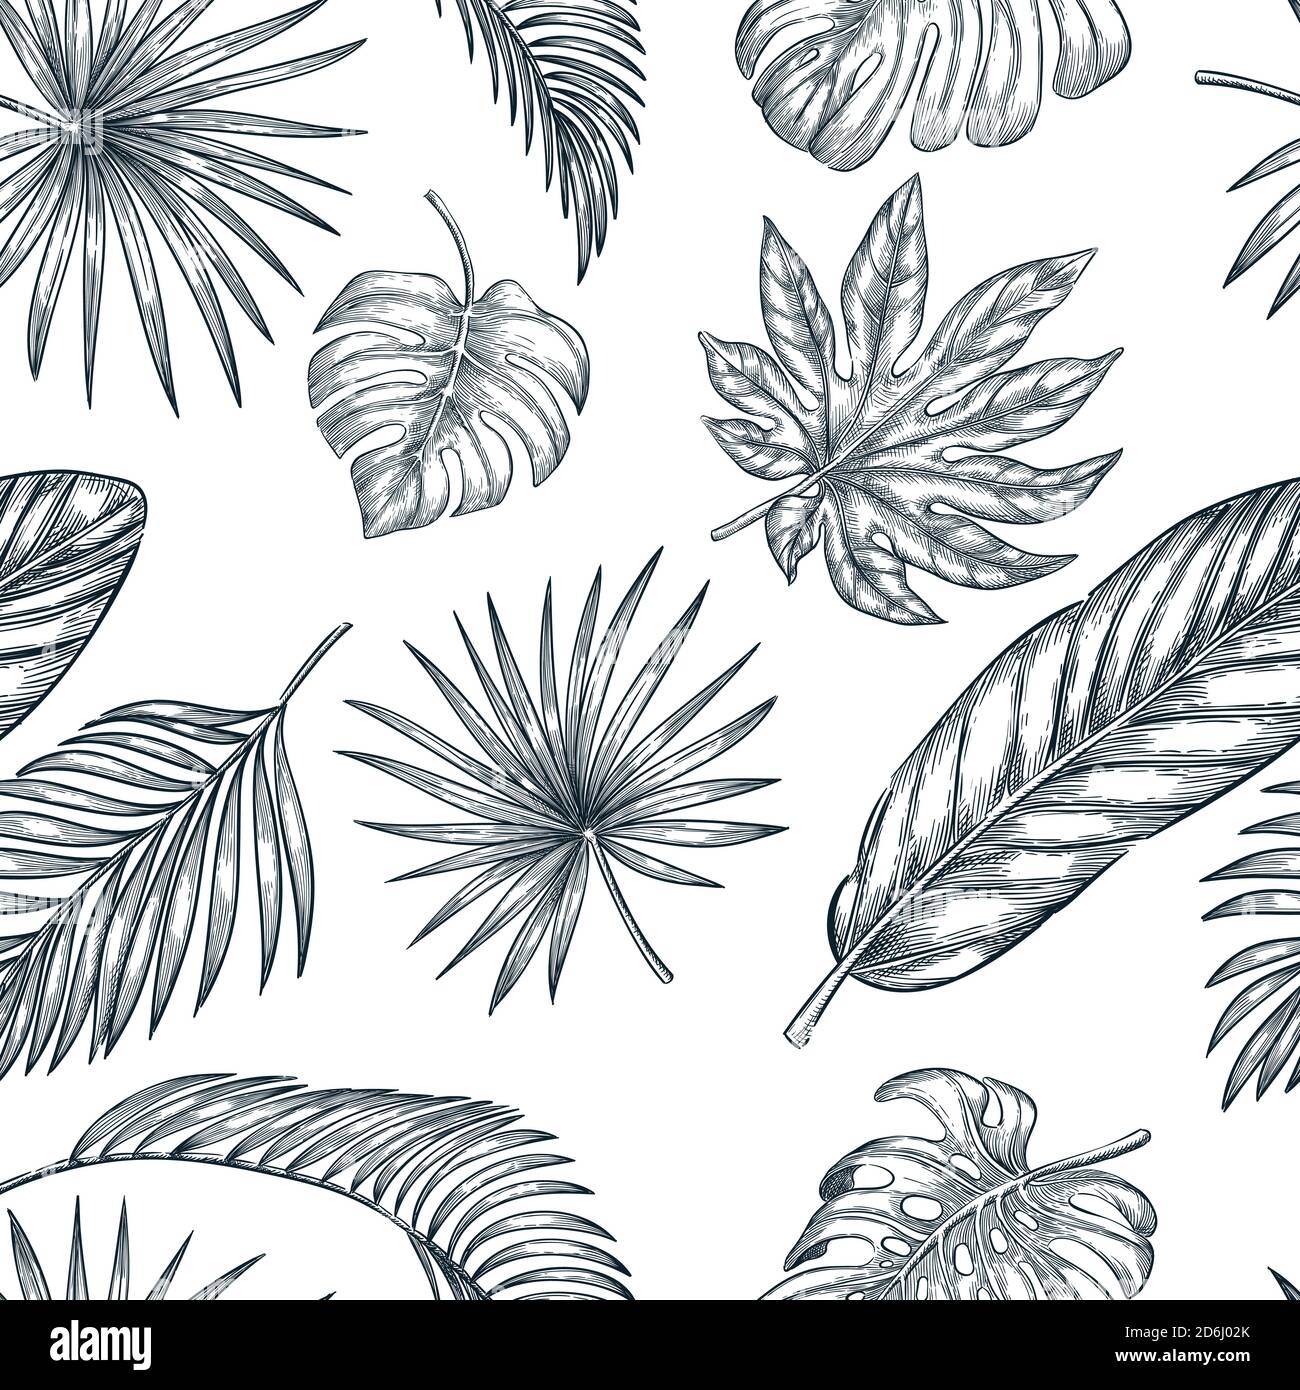 Tropical palm leaves seamless vector pattern. Sketch hand drawn illustration of jungle exotic plants. Fashion textile print or background design. Stock Vector